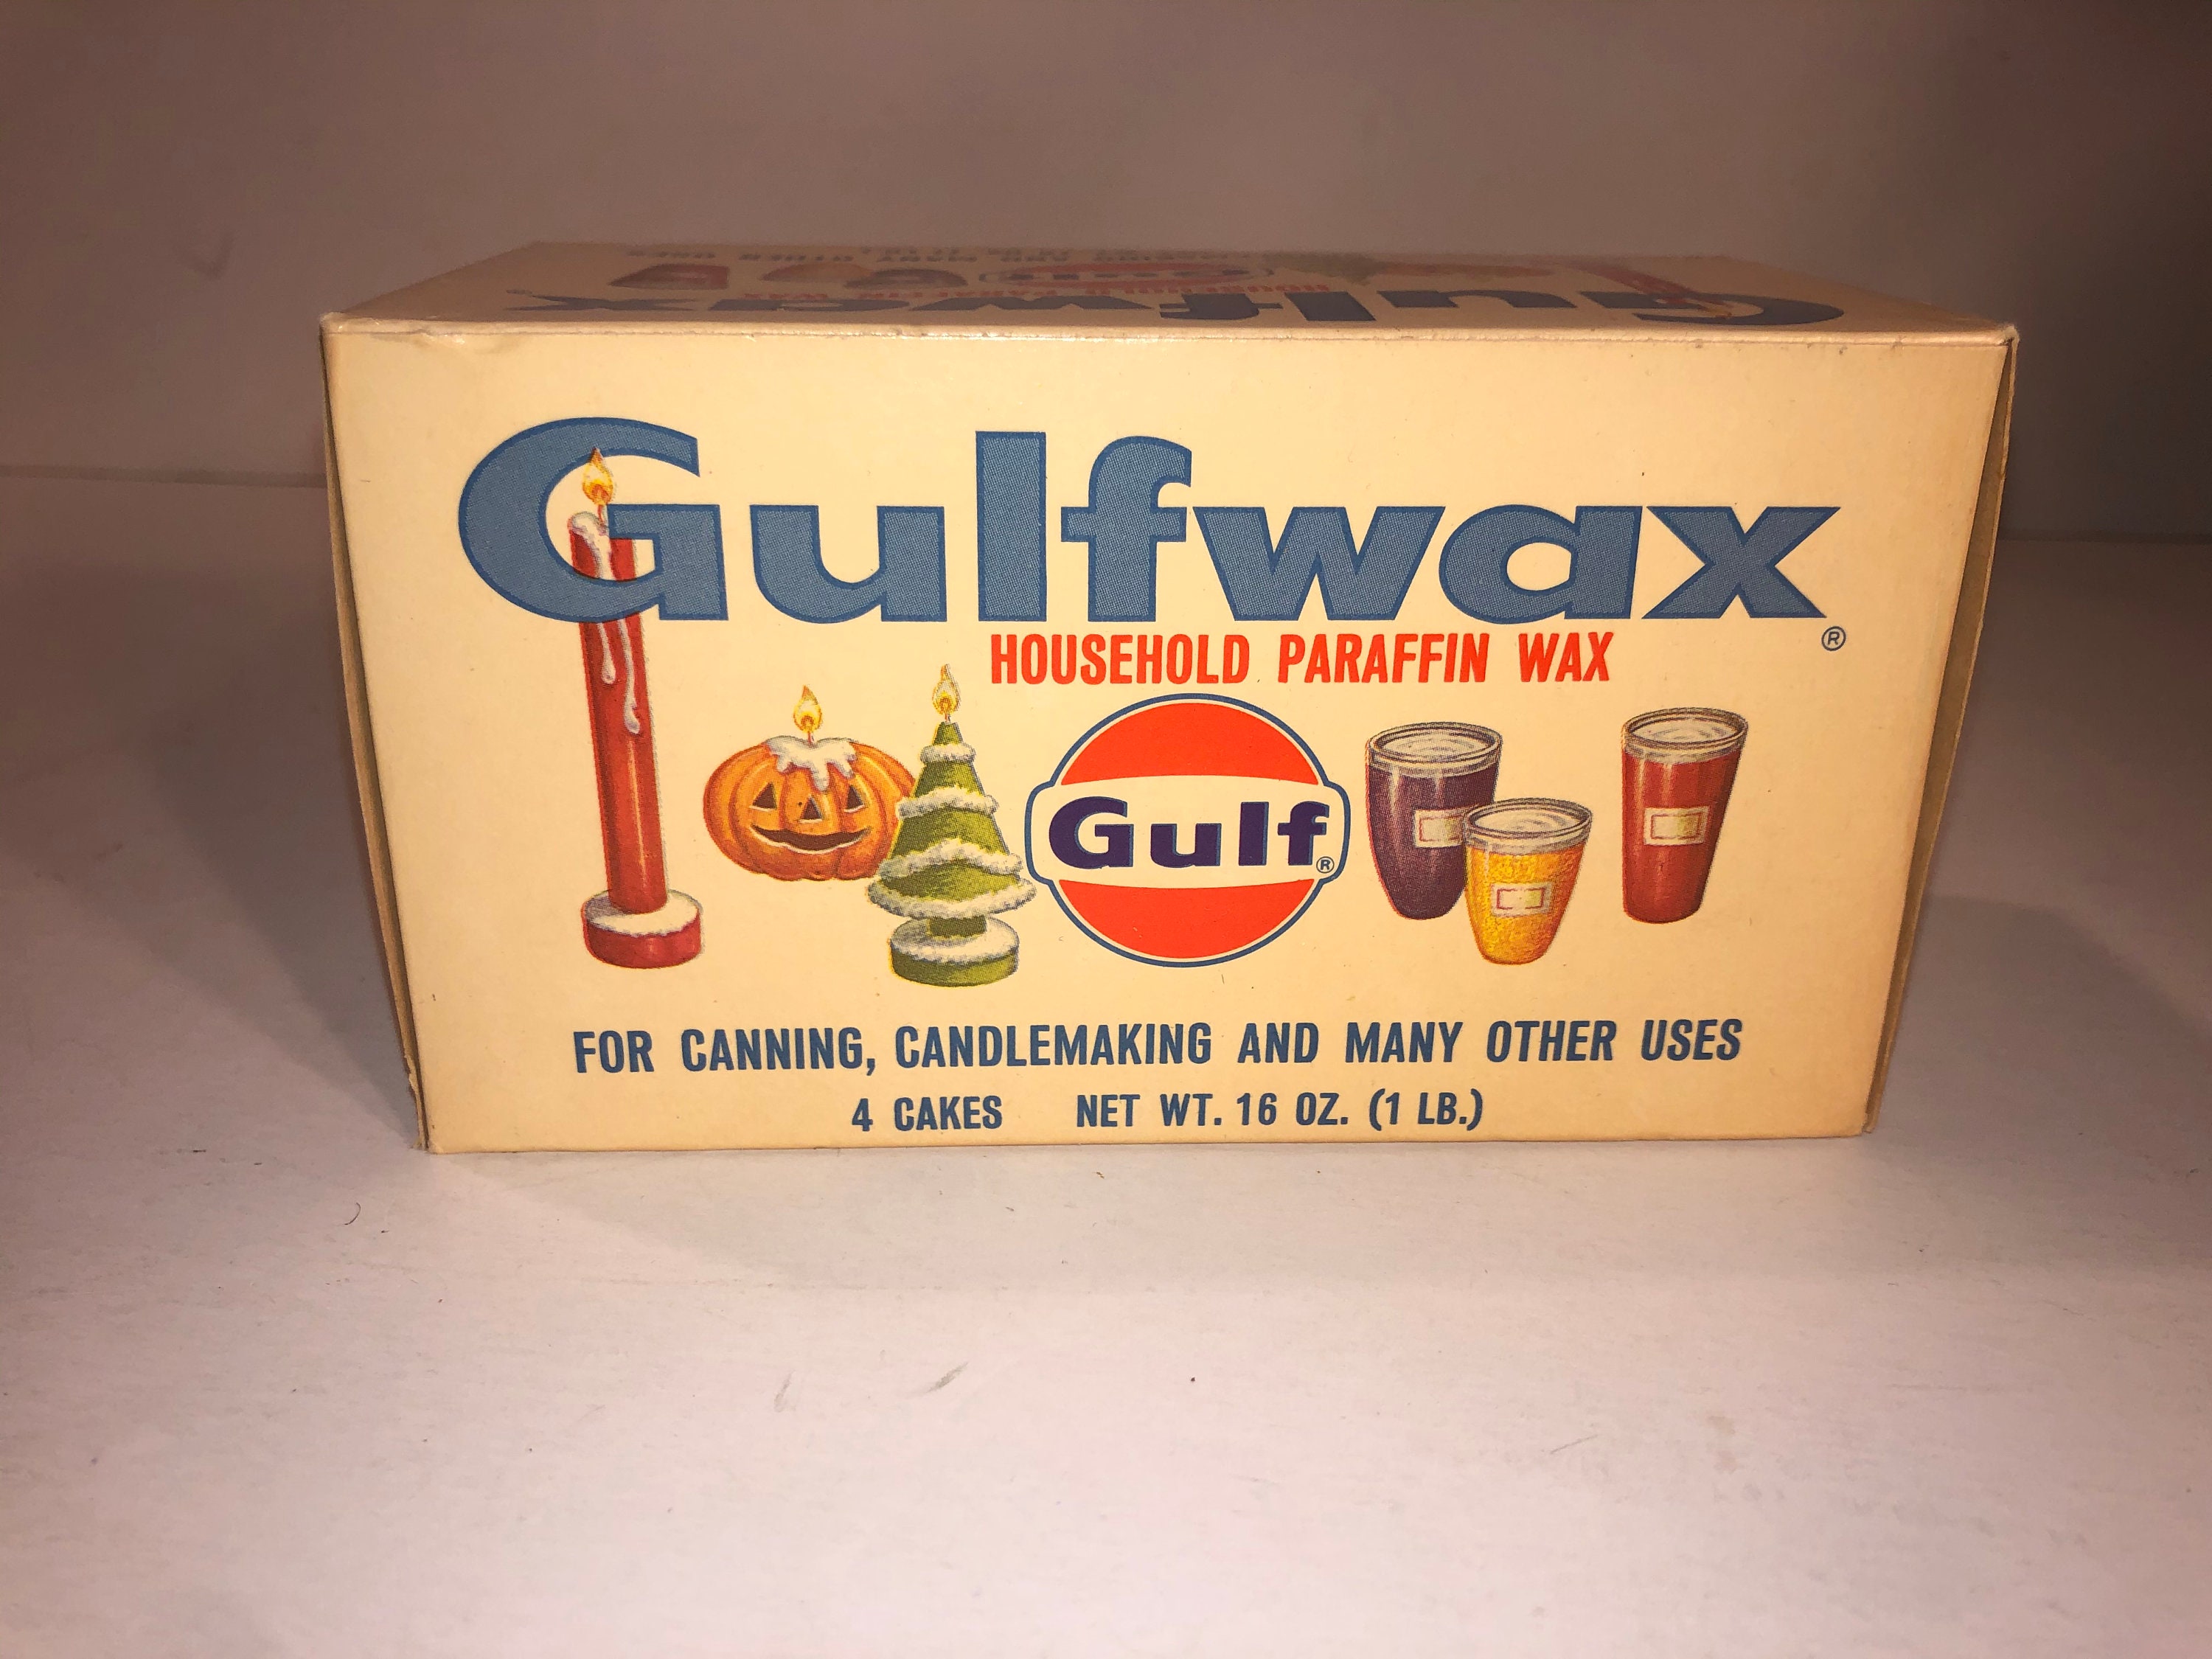 Vintage Gulfwax Paraffin Wax 1 Pound Vintage Box Gulf Oil Advertising  Canning Candles Candlemaking Craft Supplies 